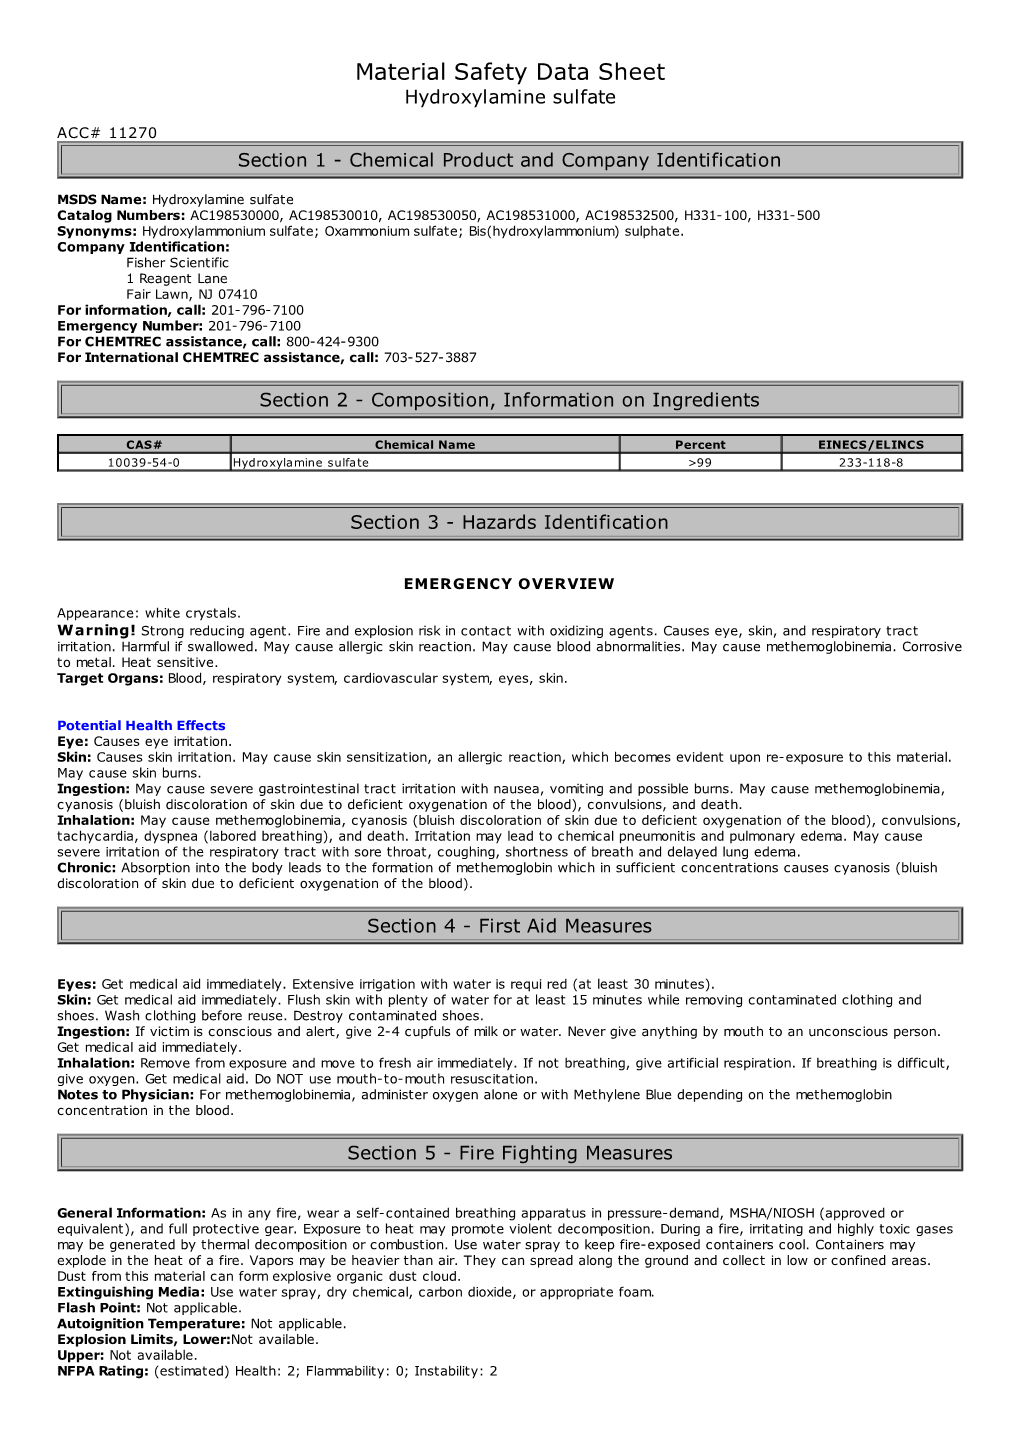 Material Safety Data Sheet Hydroxylamine Sulfate ACC# 11270 Section 1 - Chemical Product and Company Identification